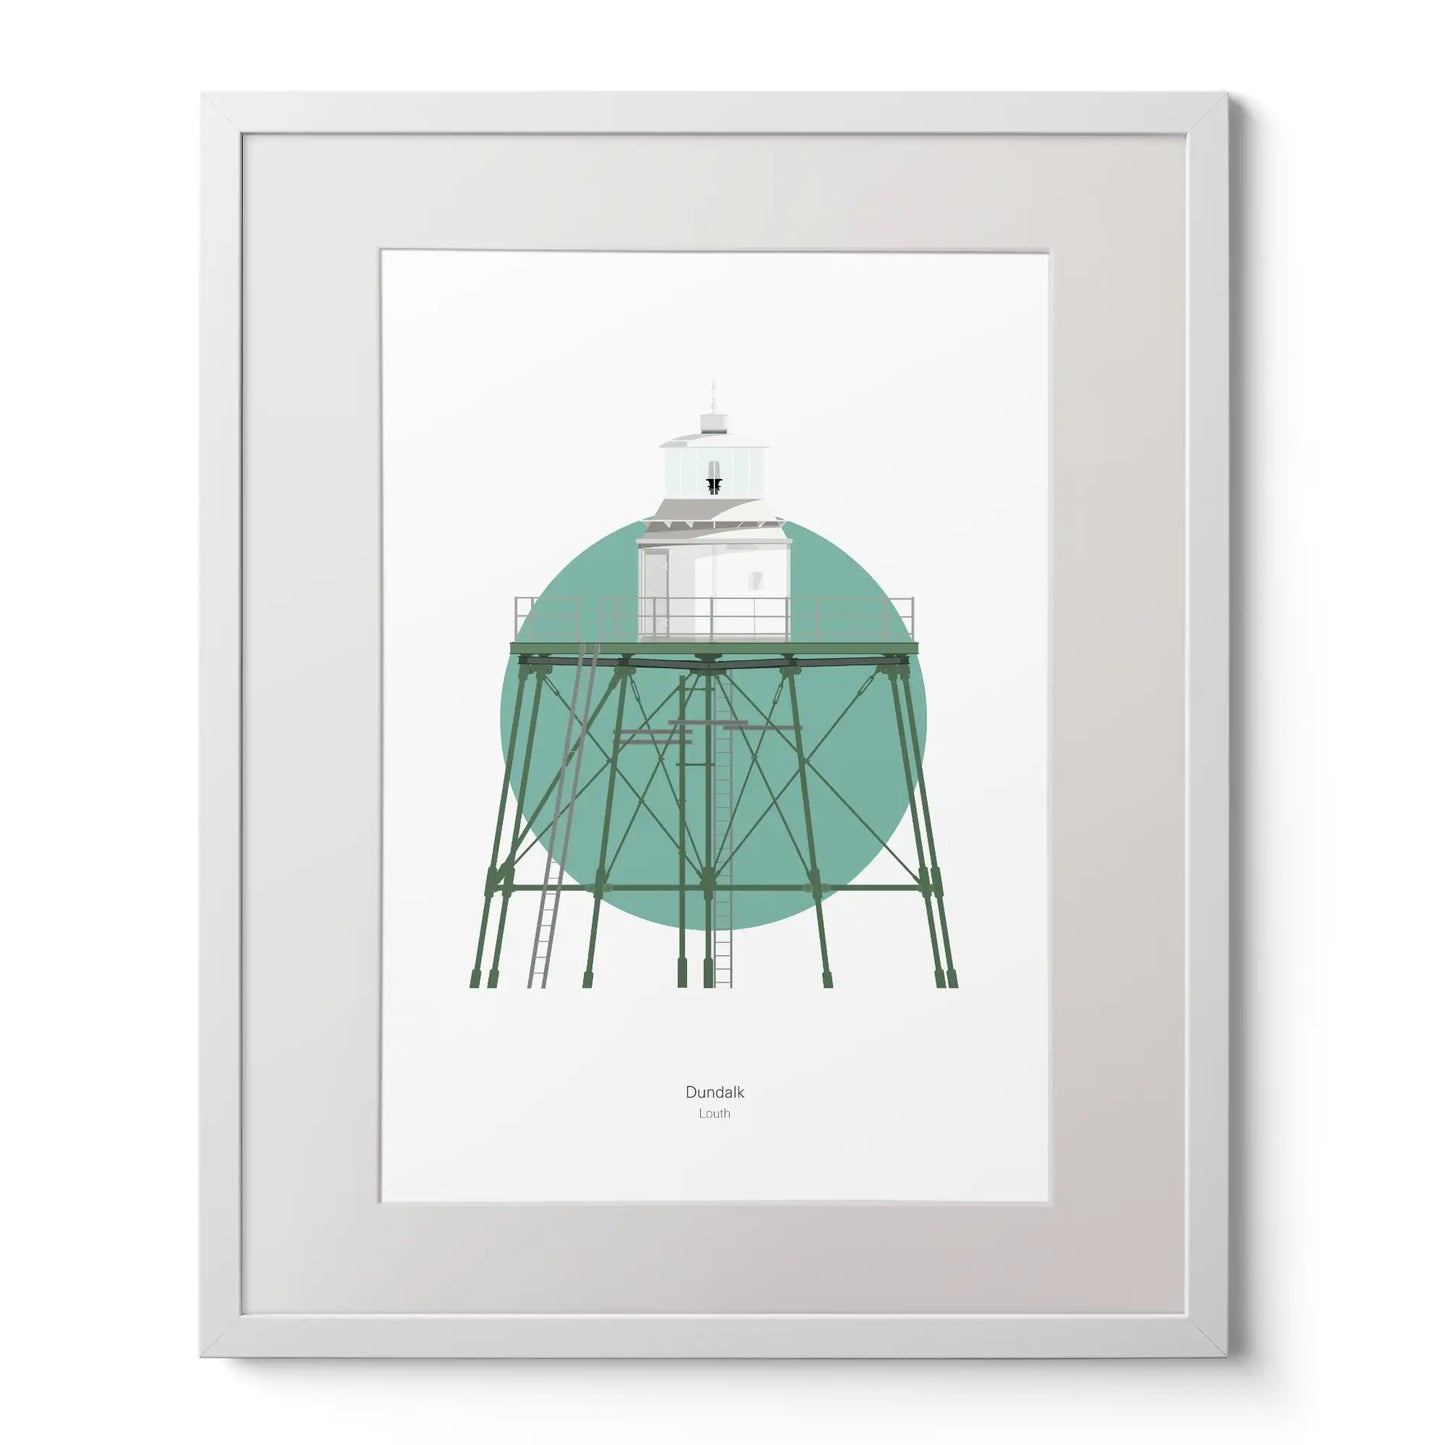 Contemporary art print of Dundalk lighthouse on a white background inside light blue square,  in a white frame measuring 40x50cm.